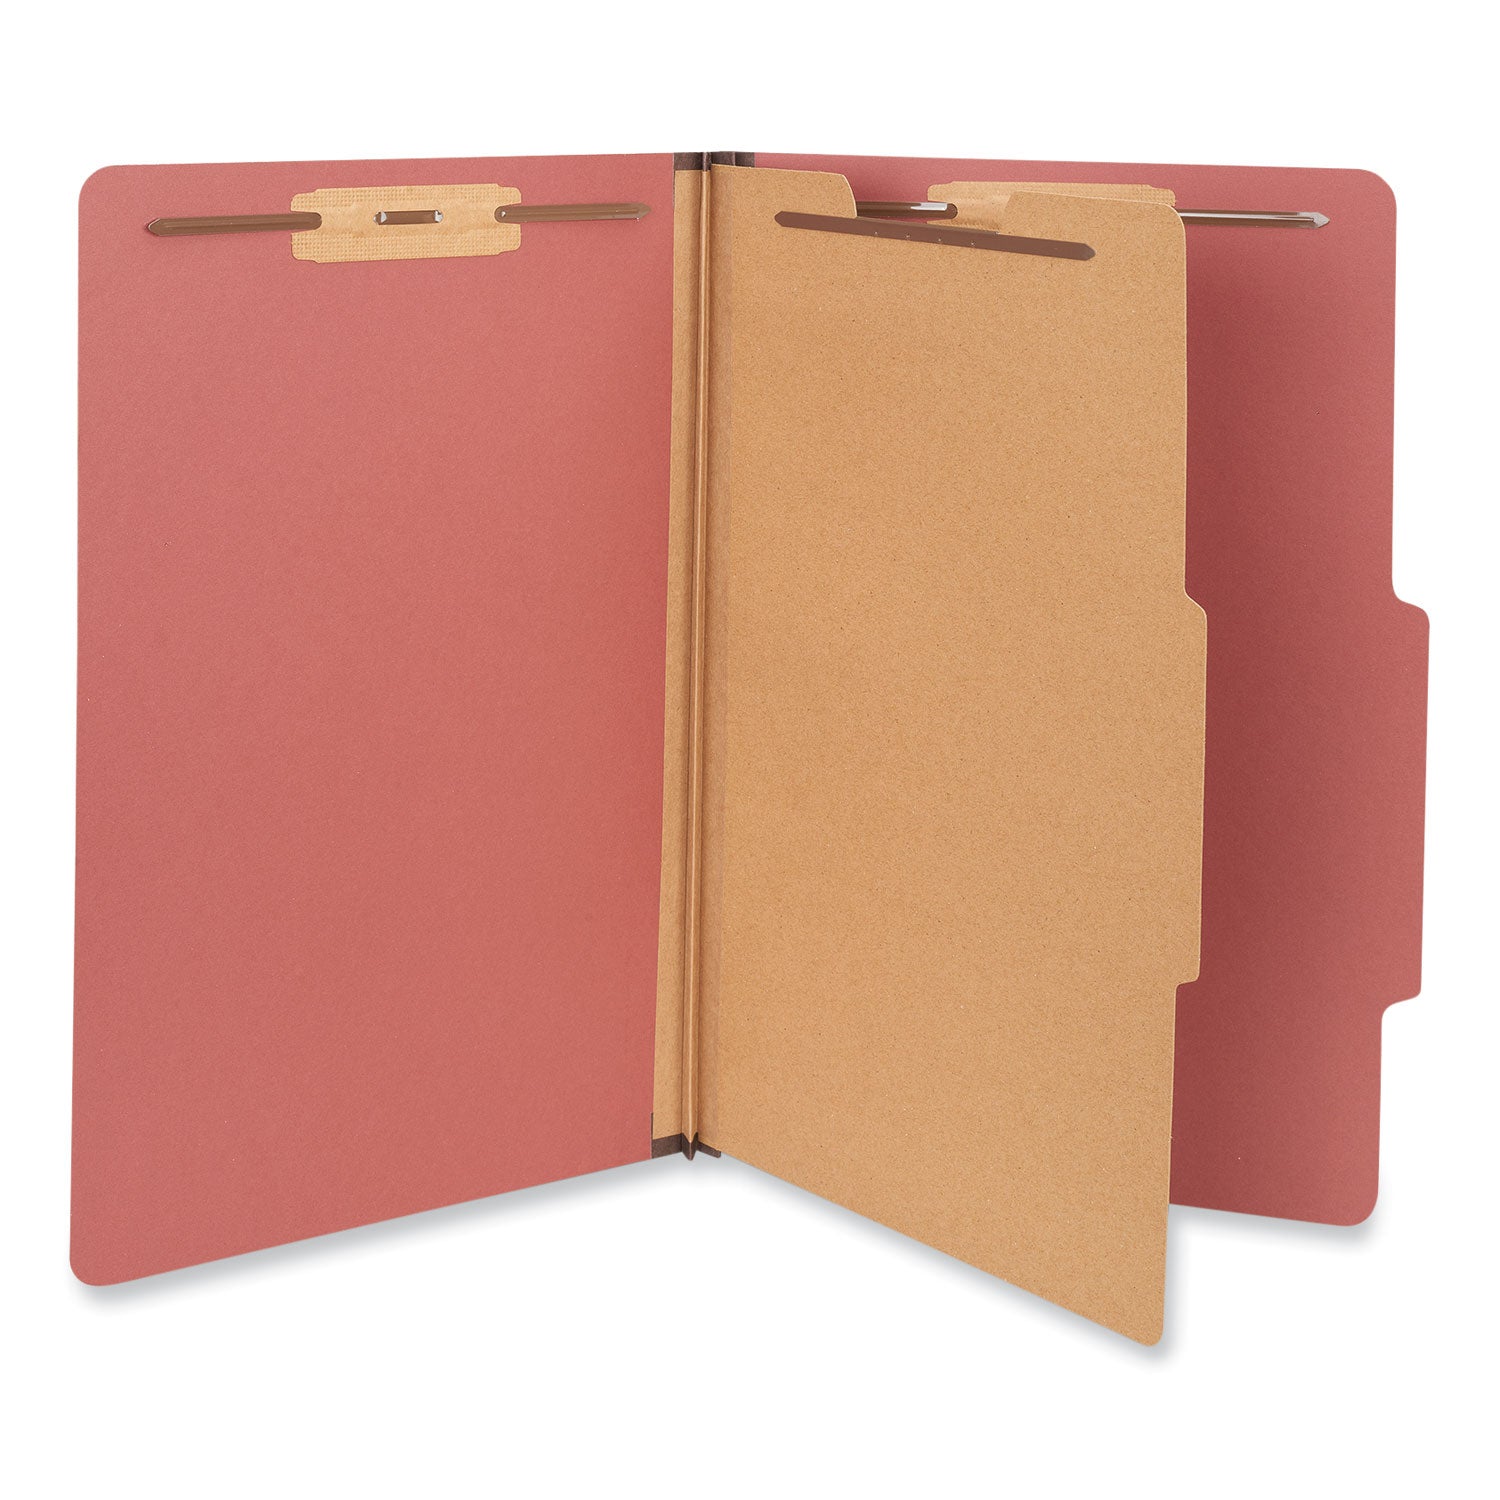 Four-Section Pressboard Classification Folders, 2" Expansion, 1 Divider, 4 Fasteners, Legal Size, Red Exterior, 10/Box - 